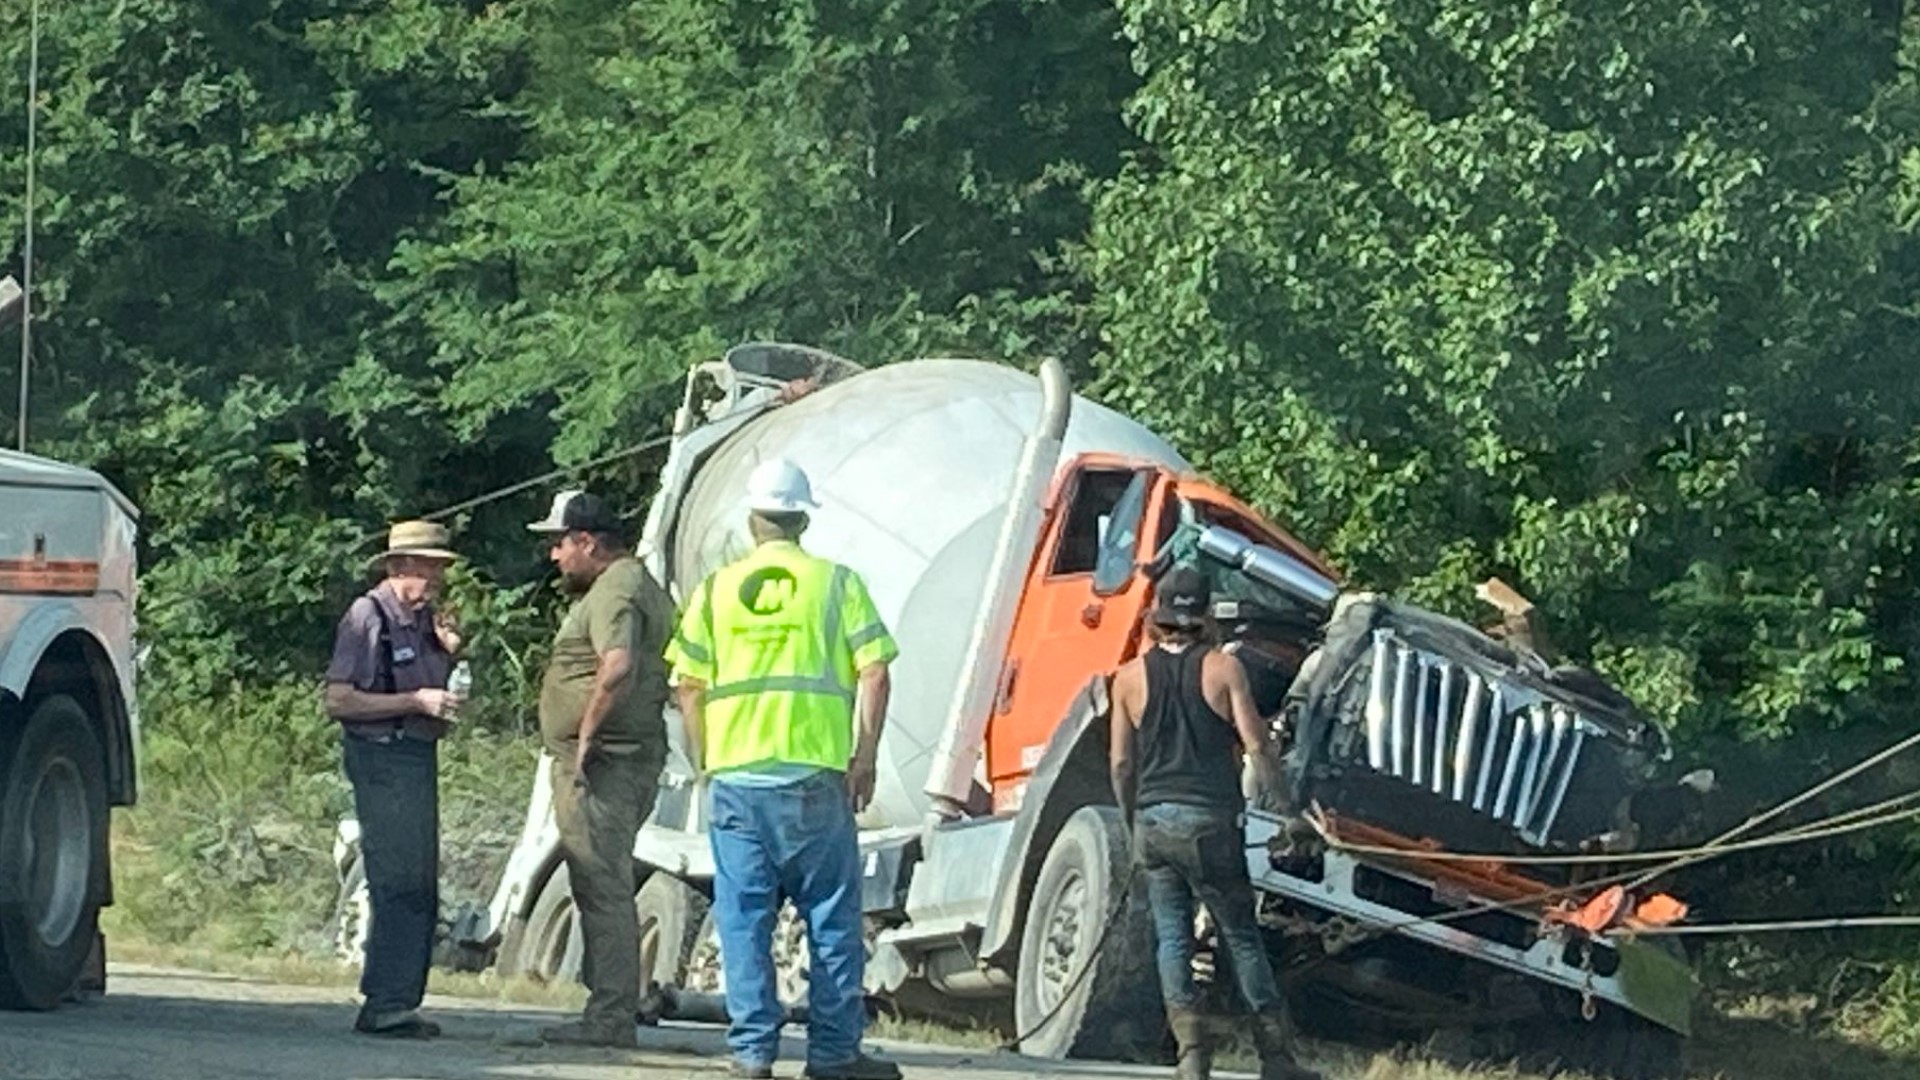 60-year-old Charles Brunson was driving a cement truck on I-540 near Van Buren when another vehicle ran into the back of the truck.